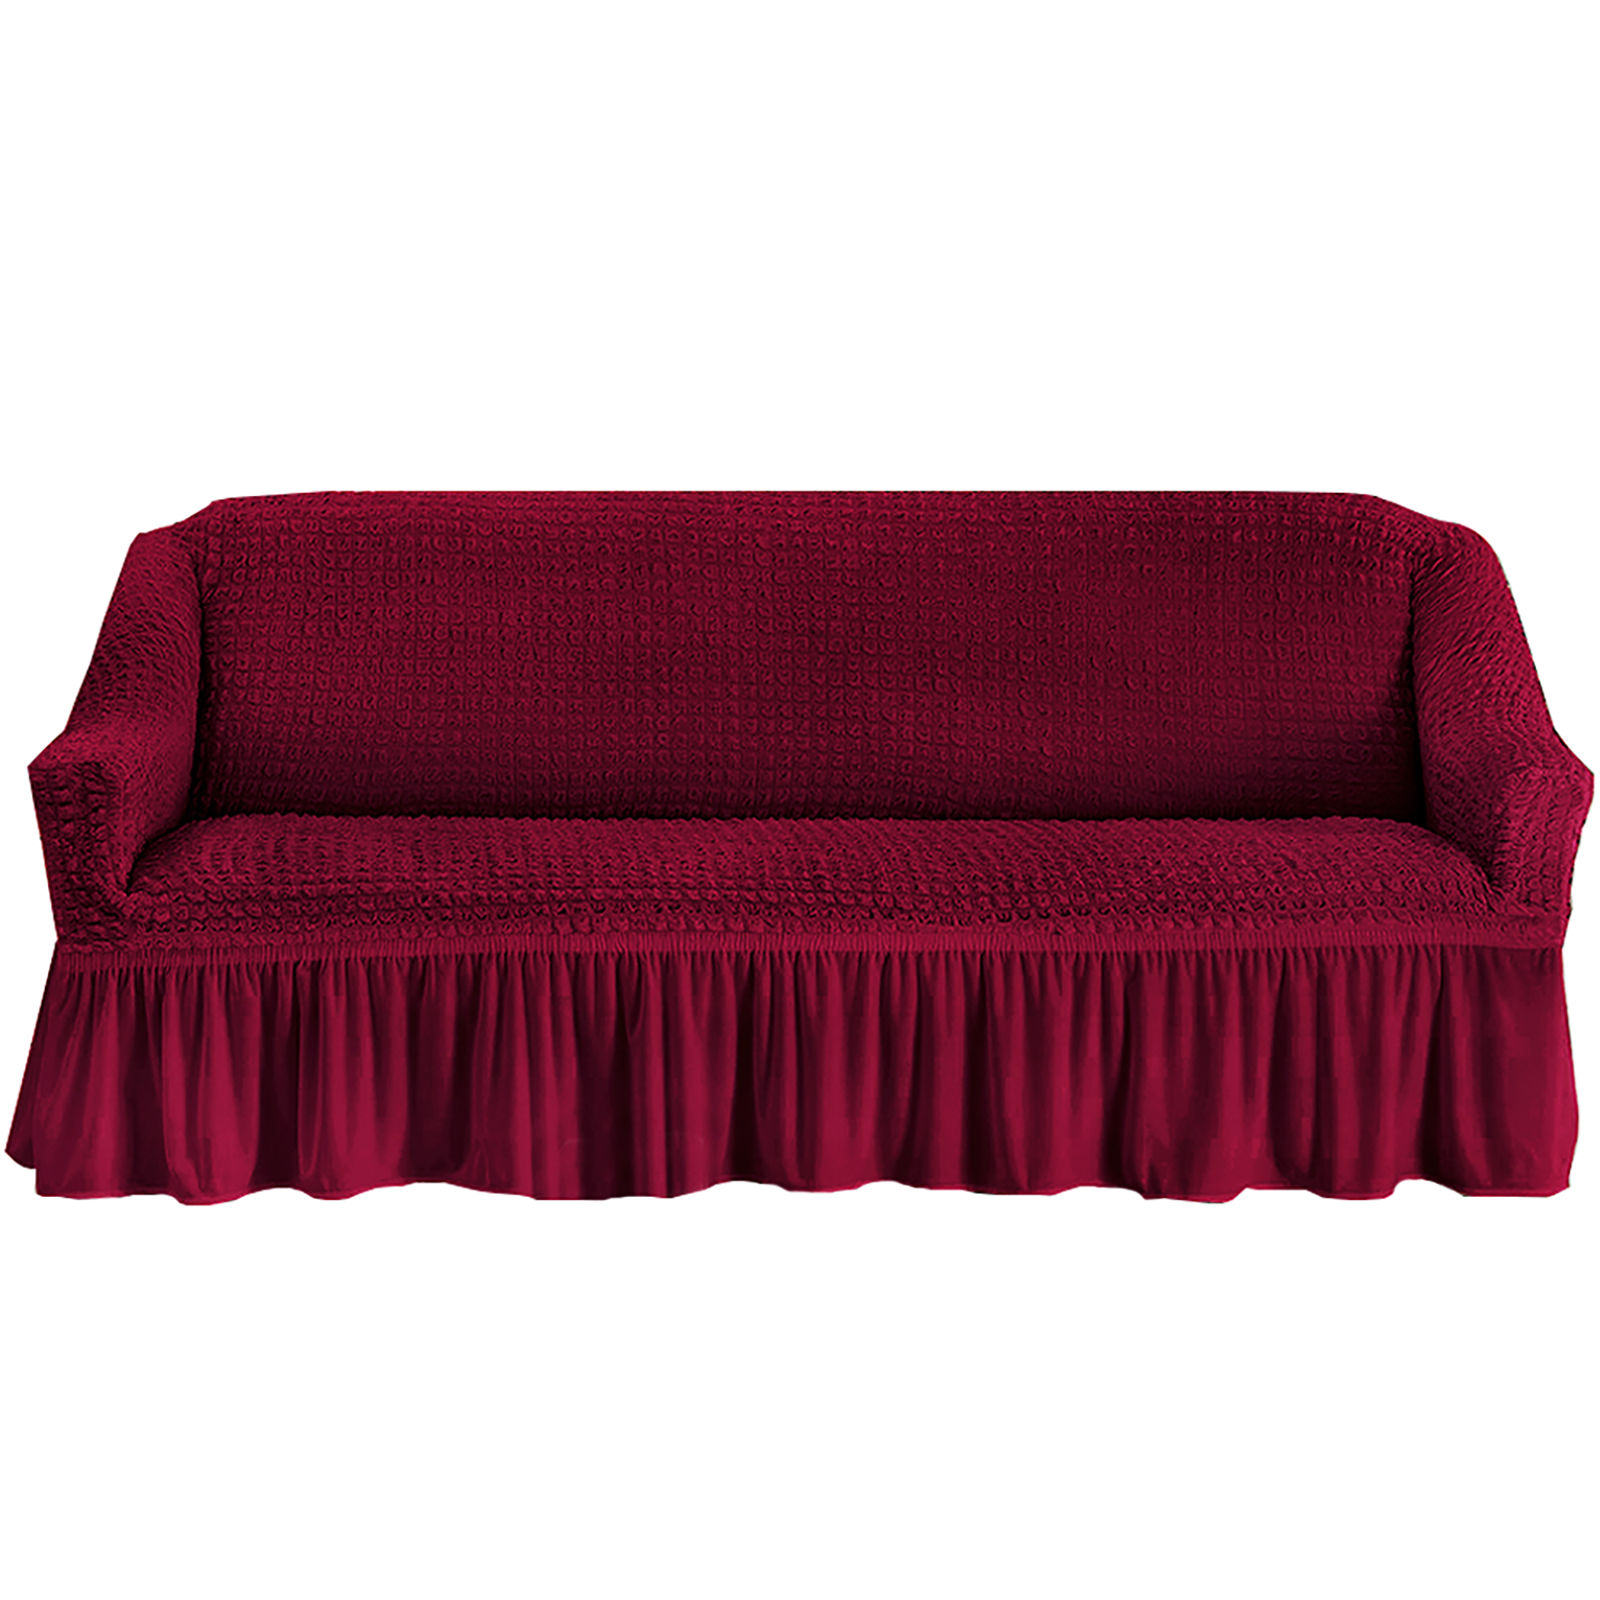 Stretch Sofa Slipcover, 3 Seater Sofa Slipcovers With Skirt With Armless Soft Sofa Cover Elastic Straps Sofa Slipcover For Living Room Kids Pets-red-Medium